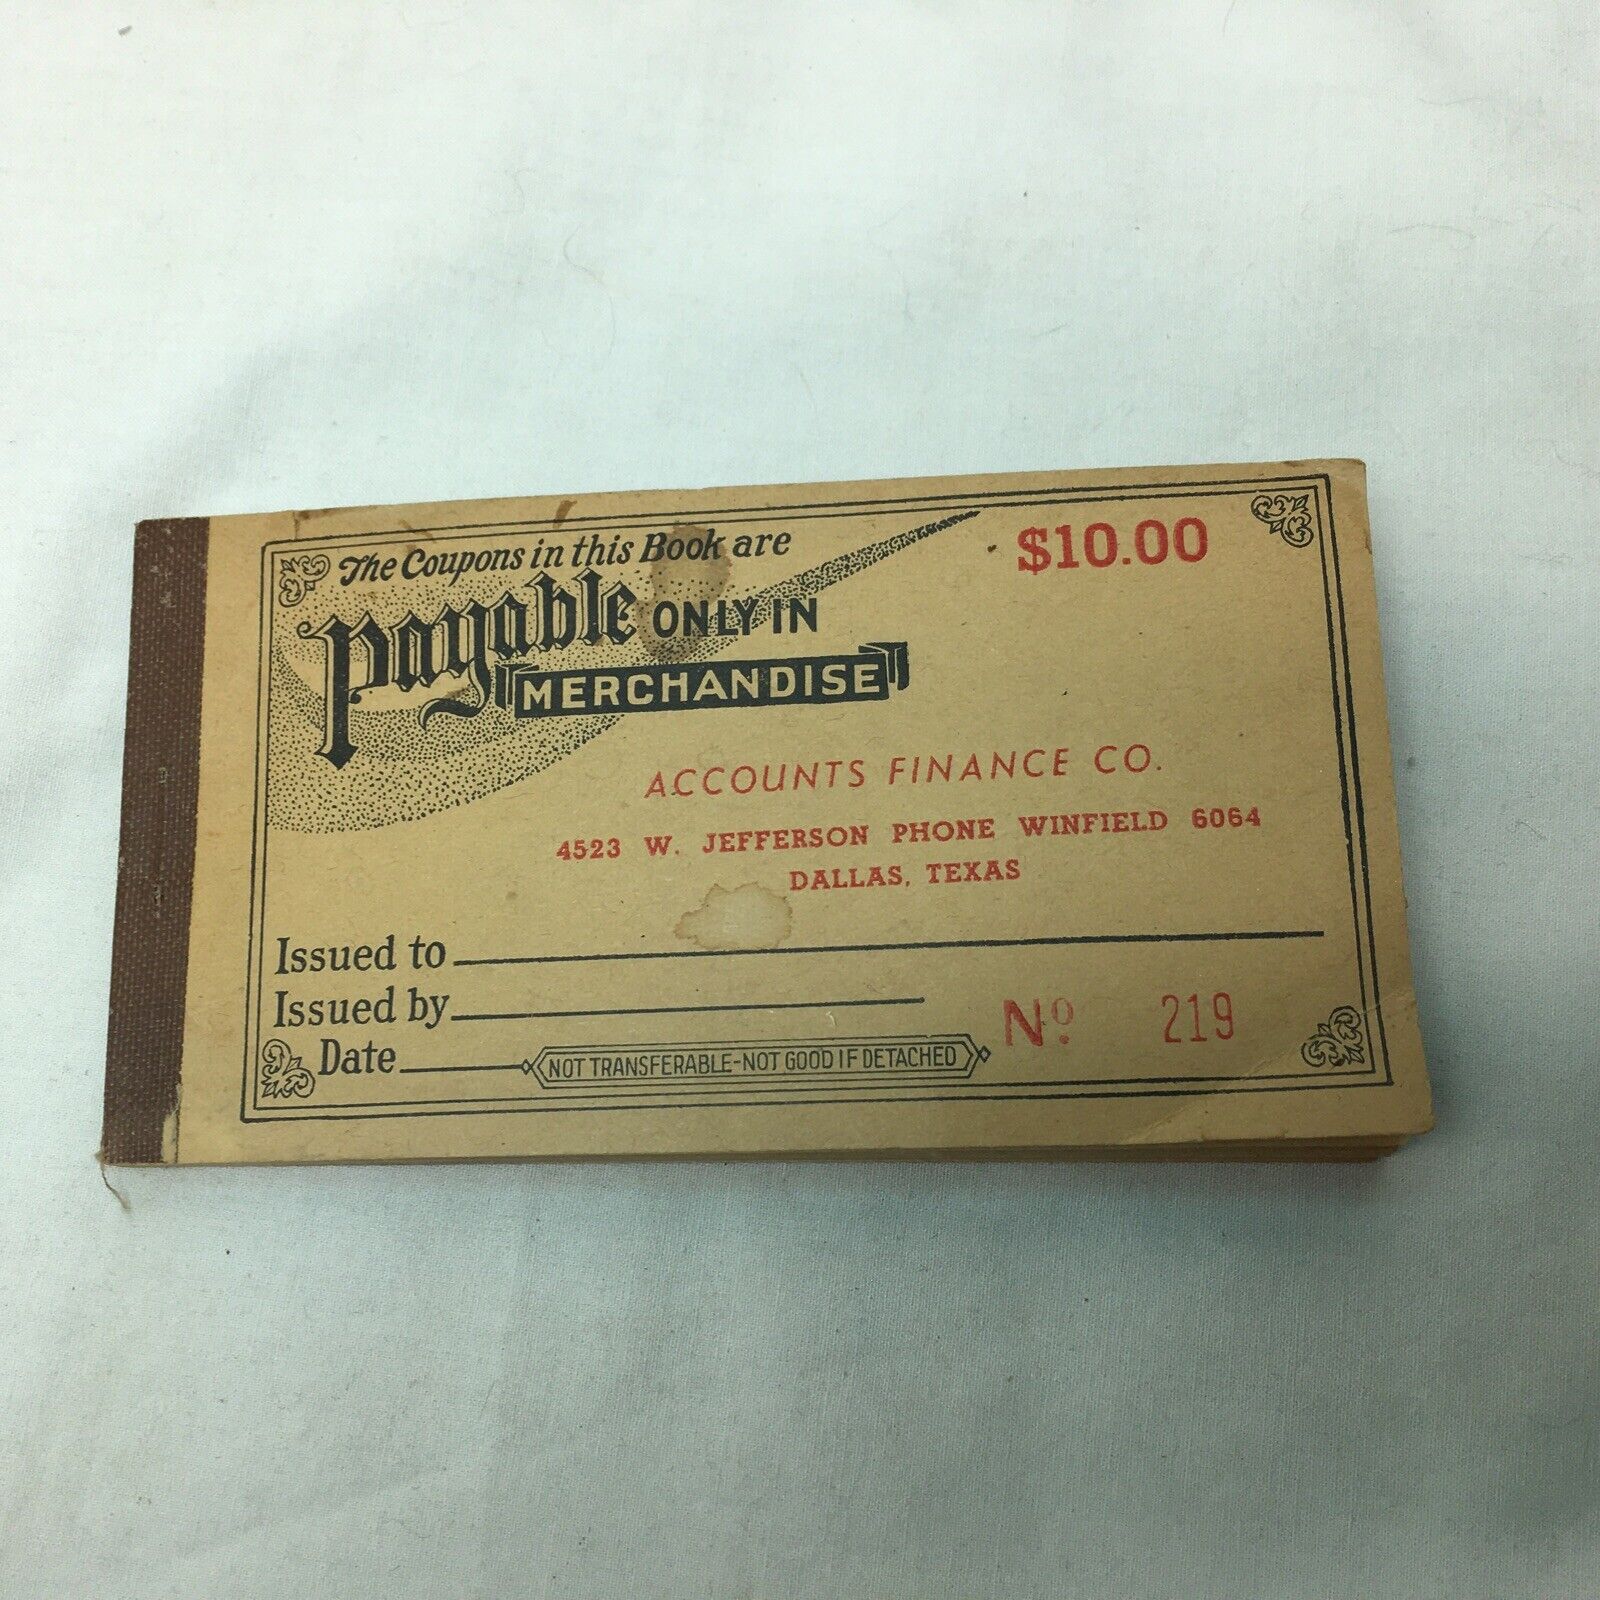 Antique 1940’s Coupon Book “Payable Only In Merchandise”